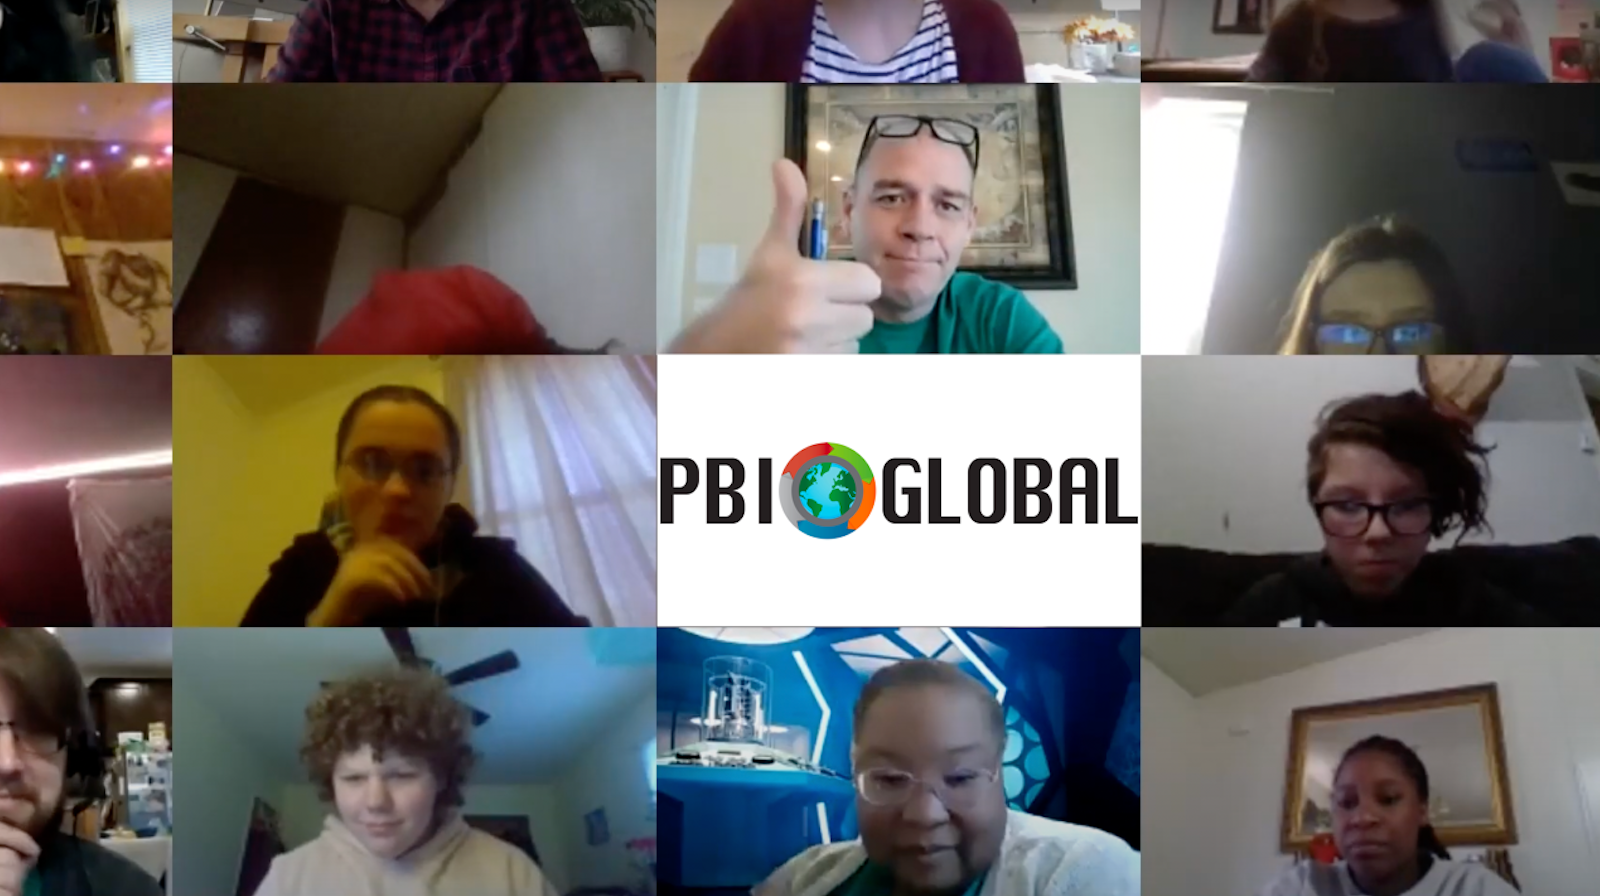 A collage of people on a virtual meeting (students and teachers) with the PBI Global logo in the center of the image